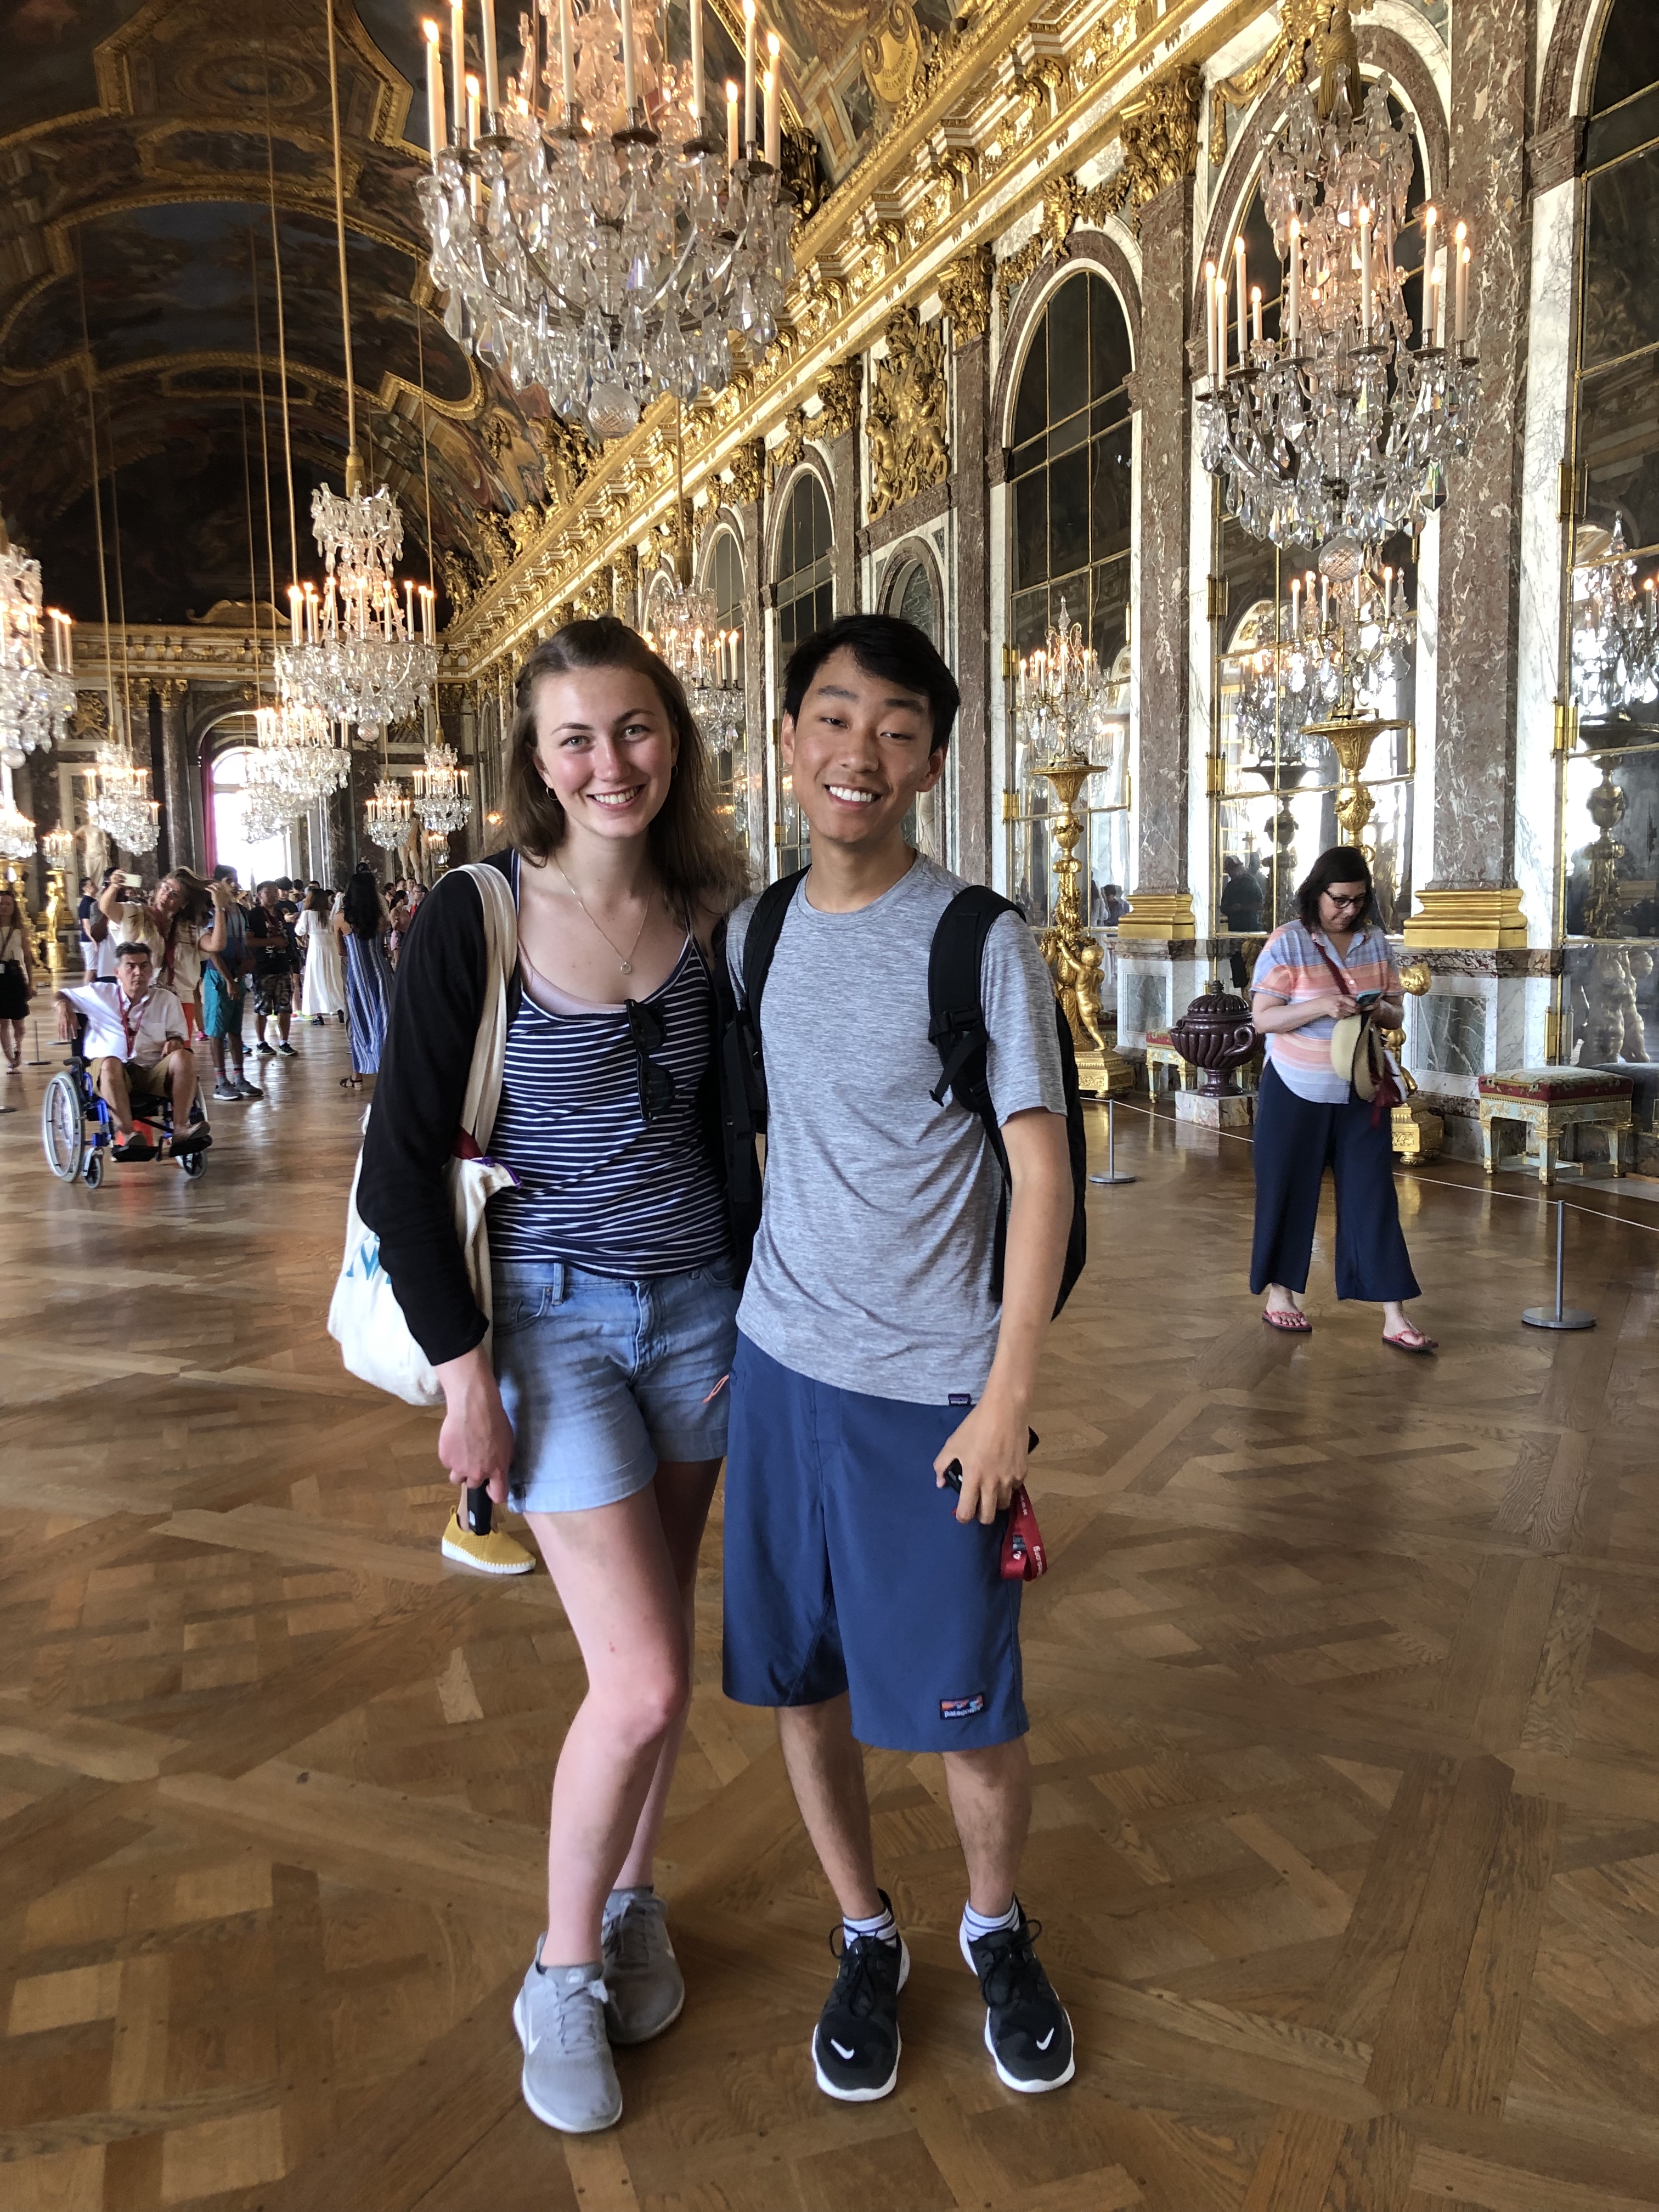 me and nelson surrounded by rich fixtures in the palace of versailles